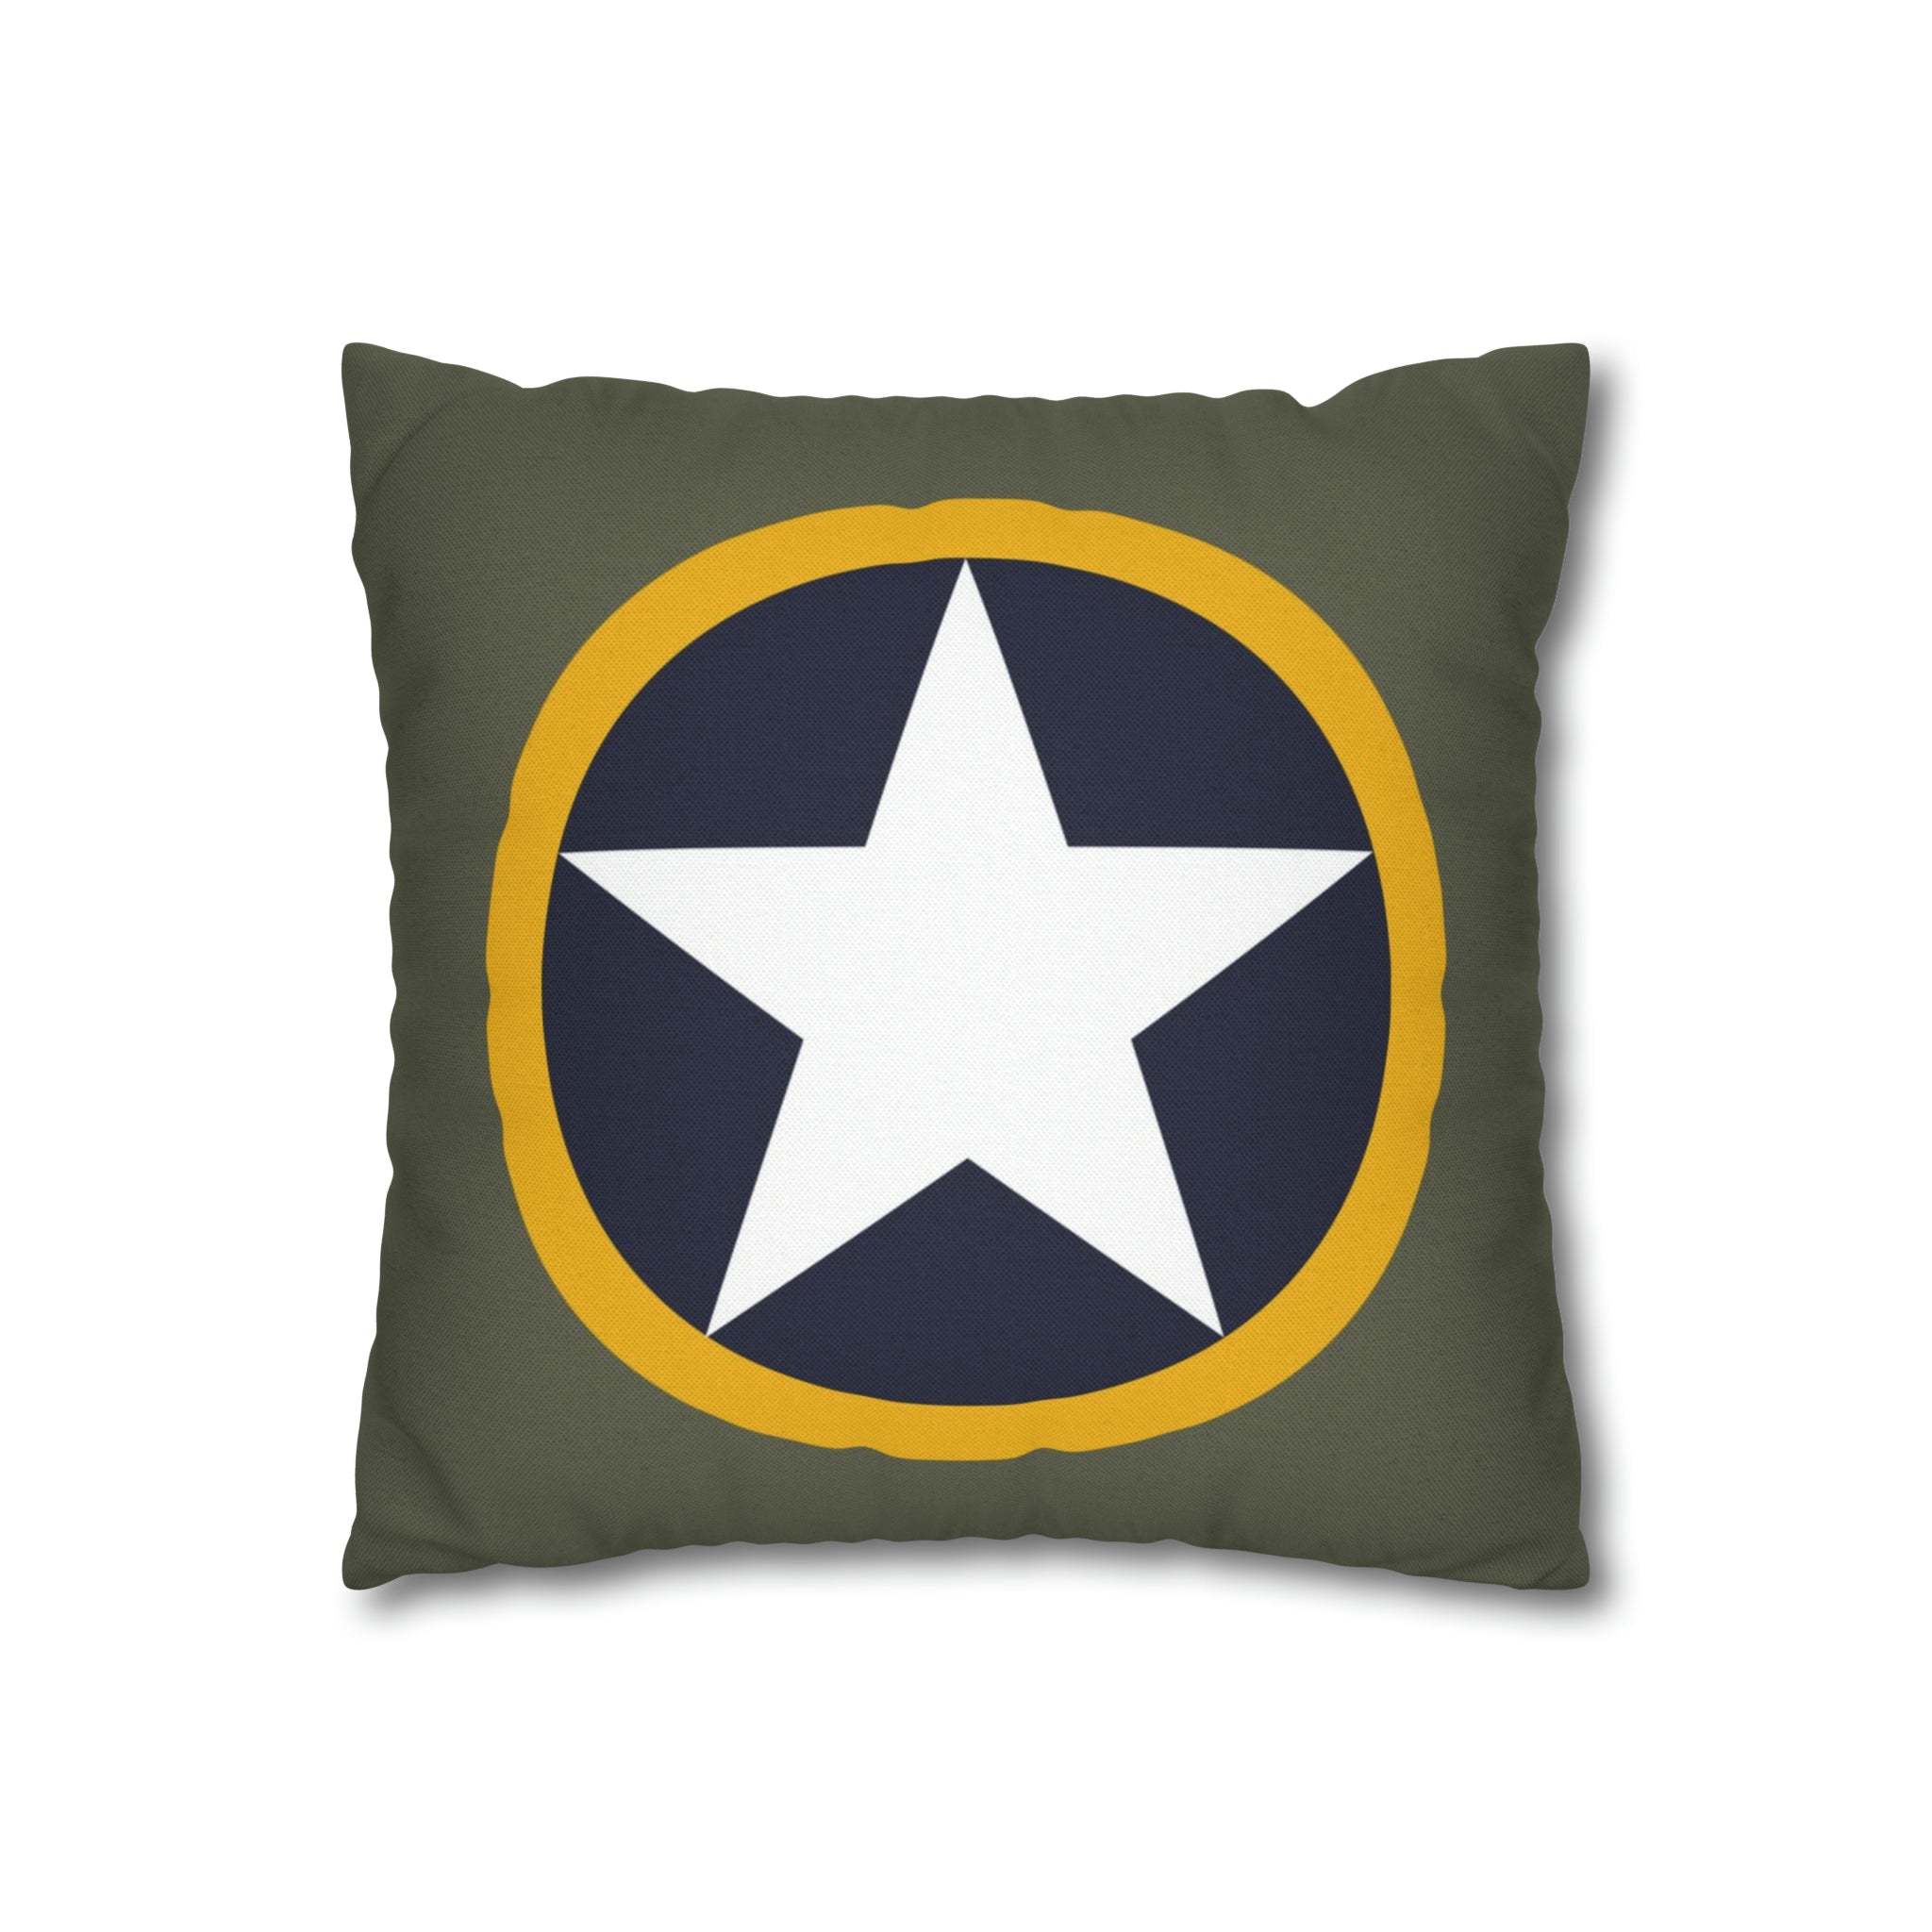 WWII USAAF "Operation Torch" Roundel Square Pillowcase - I Love a Hangar